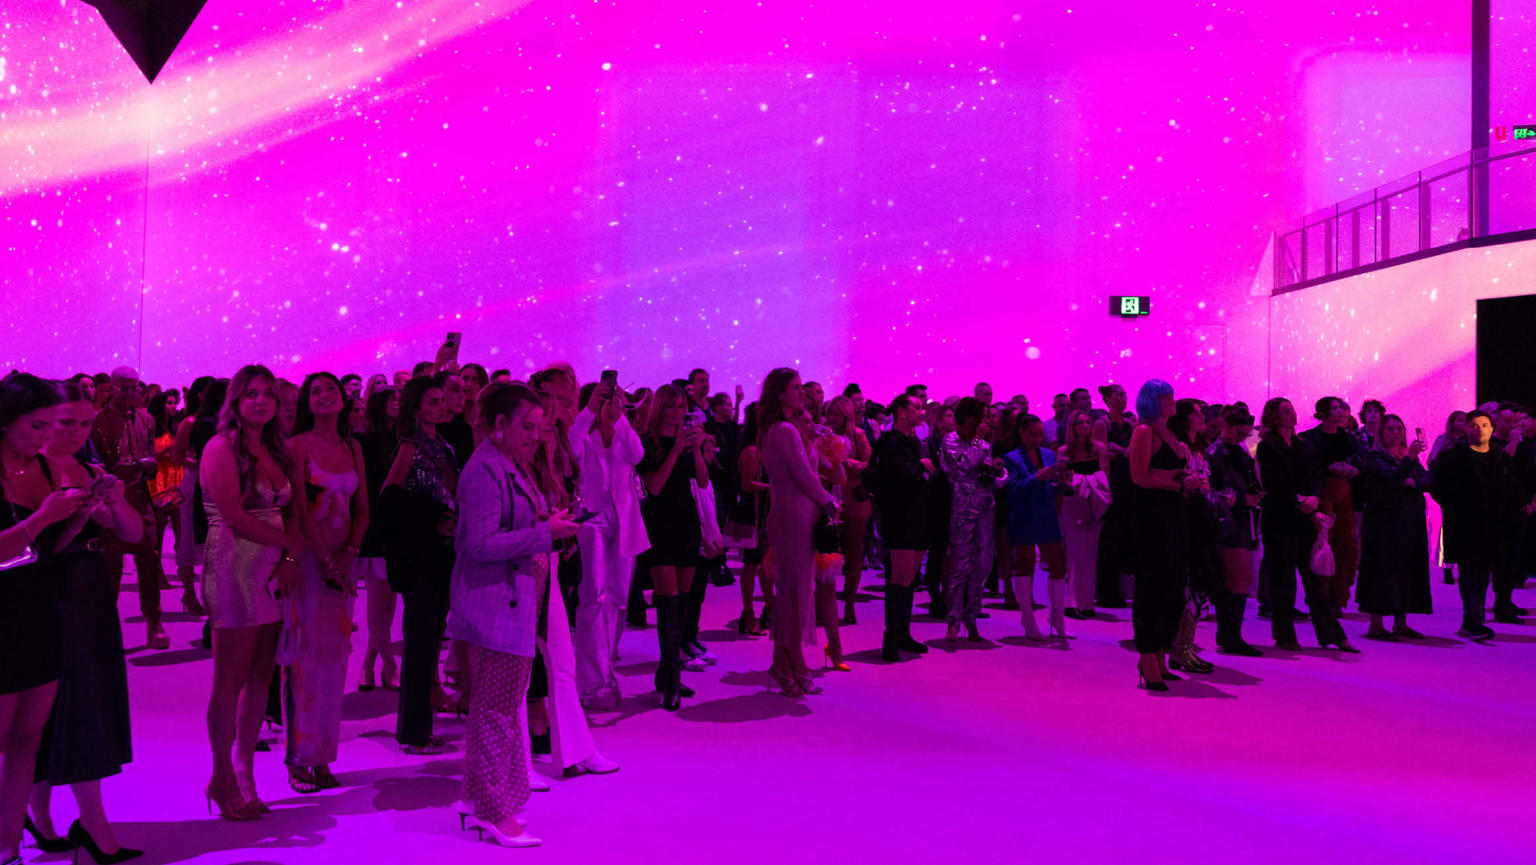 Crowd of people standing together facing a stage off camera under pink lighting. 